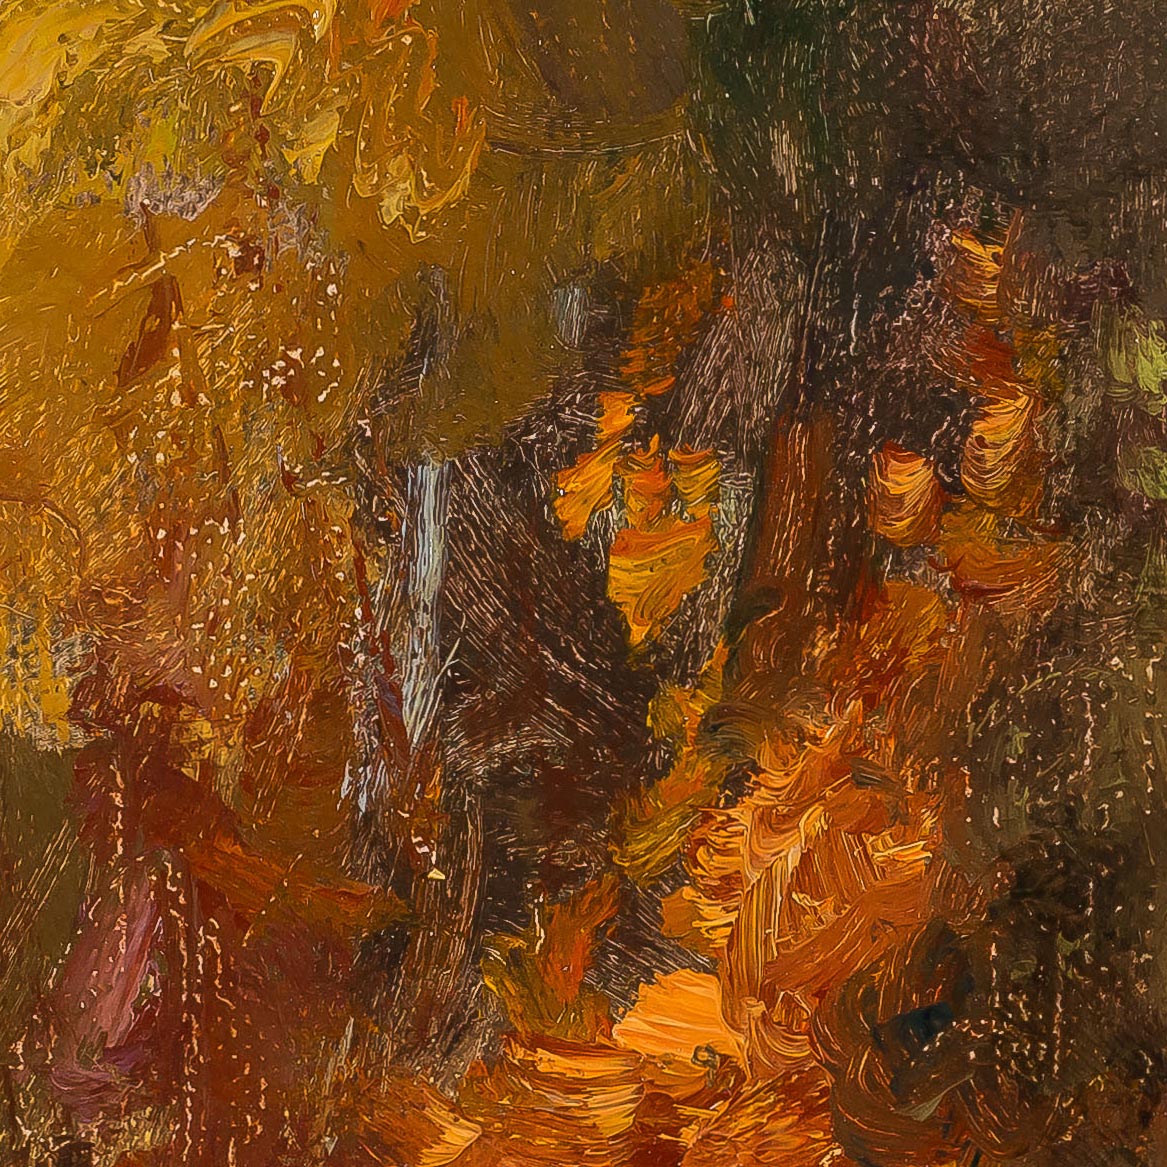 Autumn Whisper - painting by Mary Pettis photographed by Mitch Rossow -detail